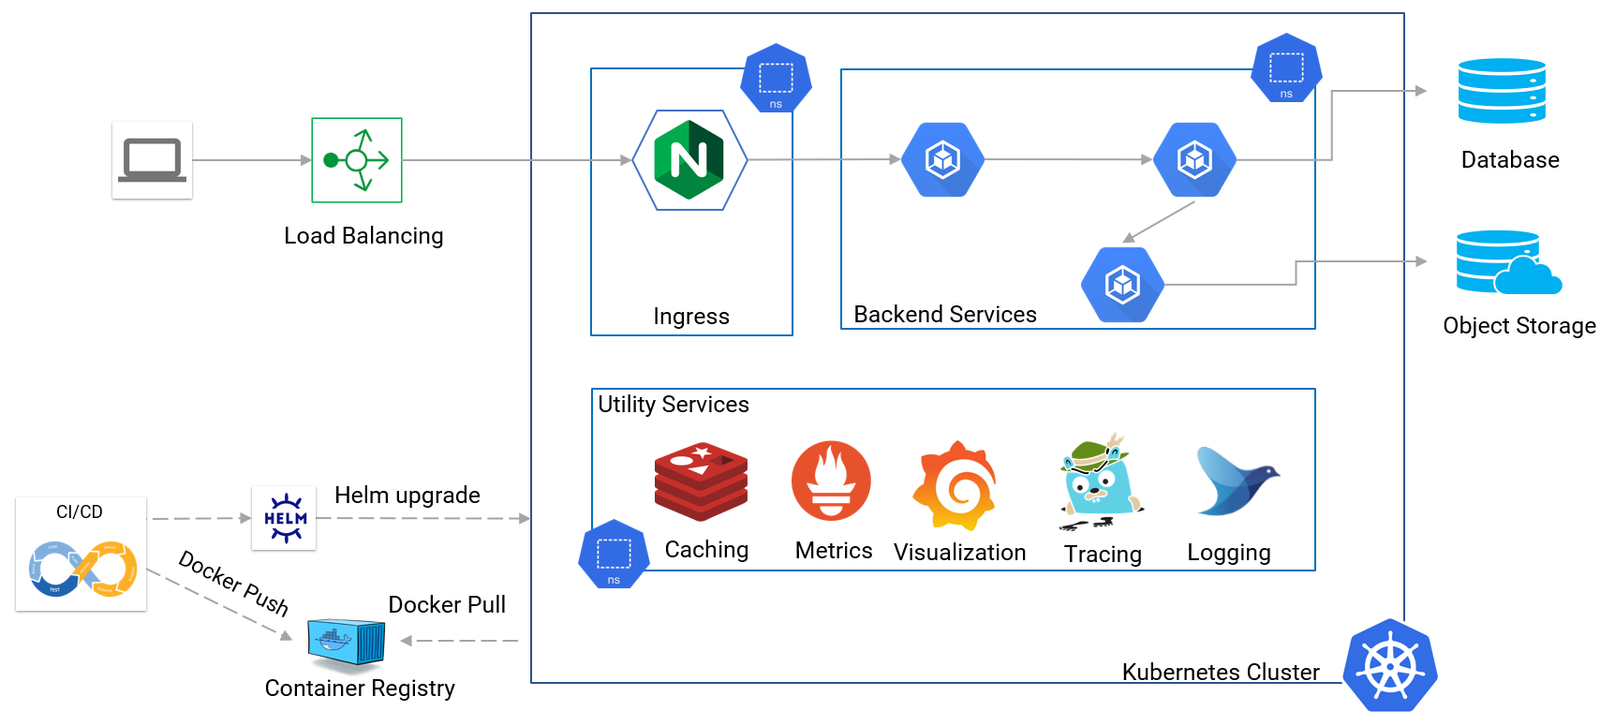 In the previous post RESTful Microservices with Spring Boot and Kubernetes, I explained how to design and develop a microservice application using Spr